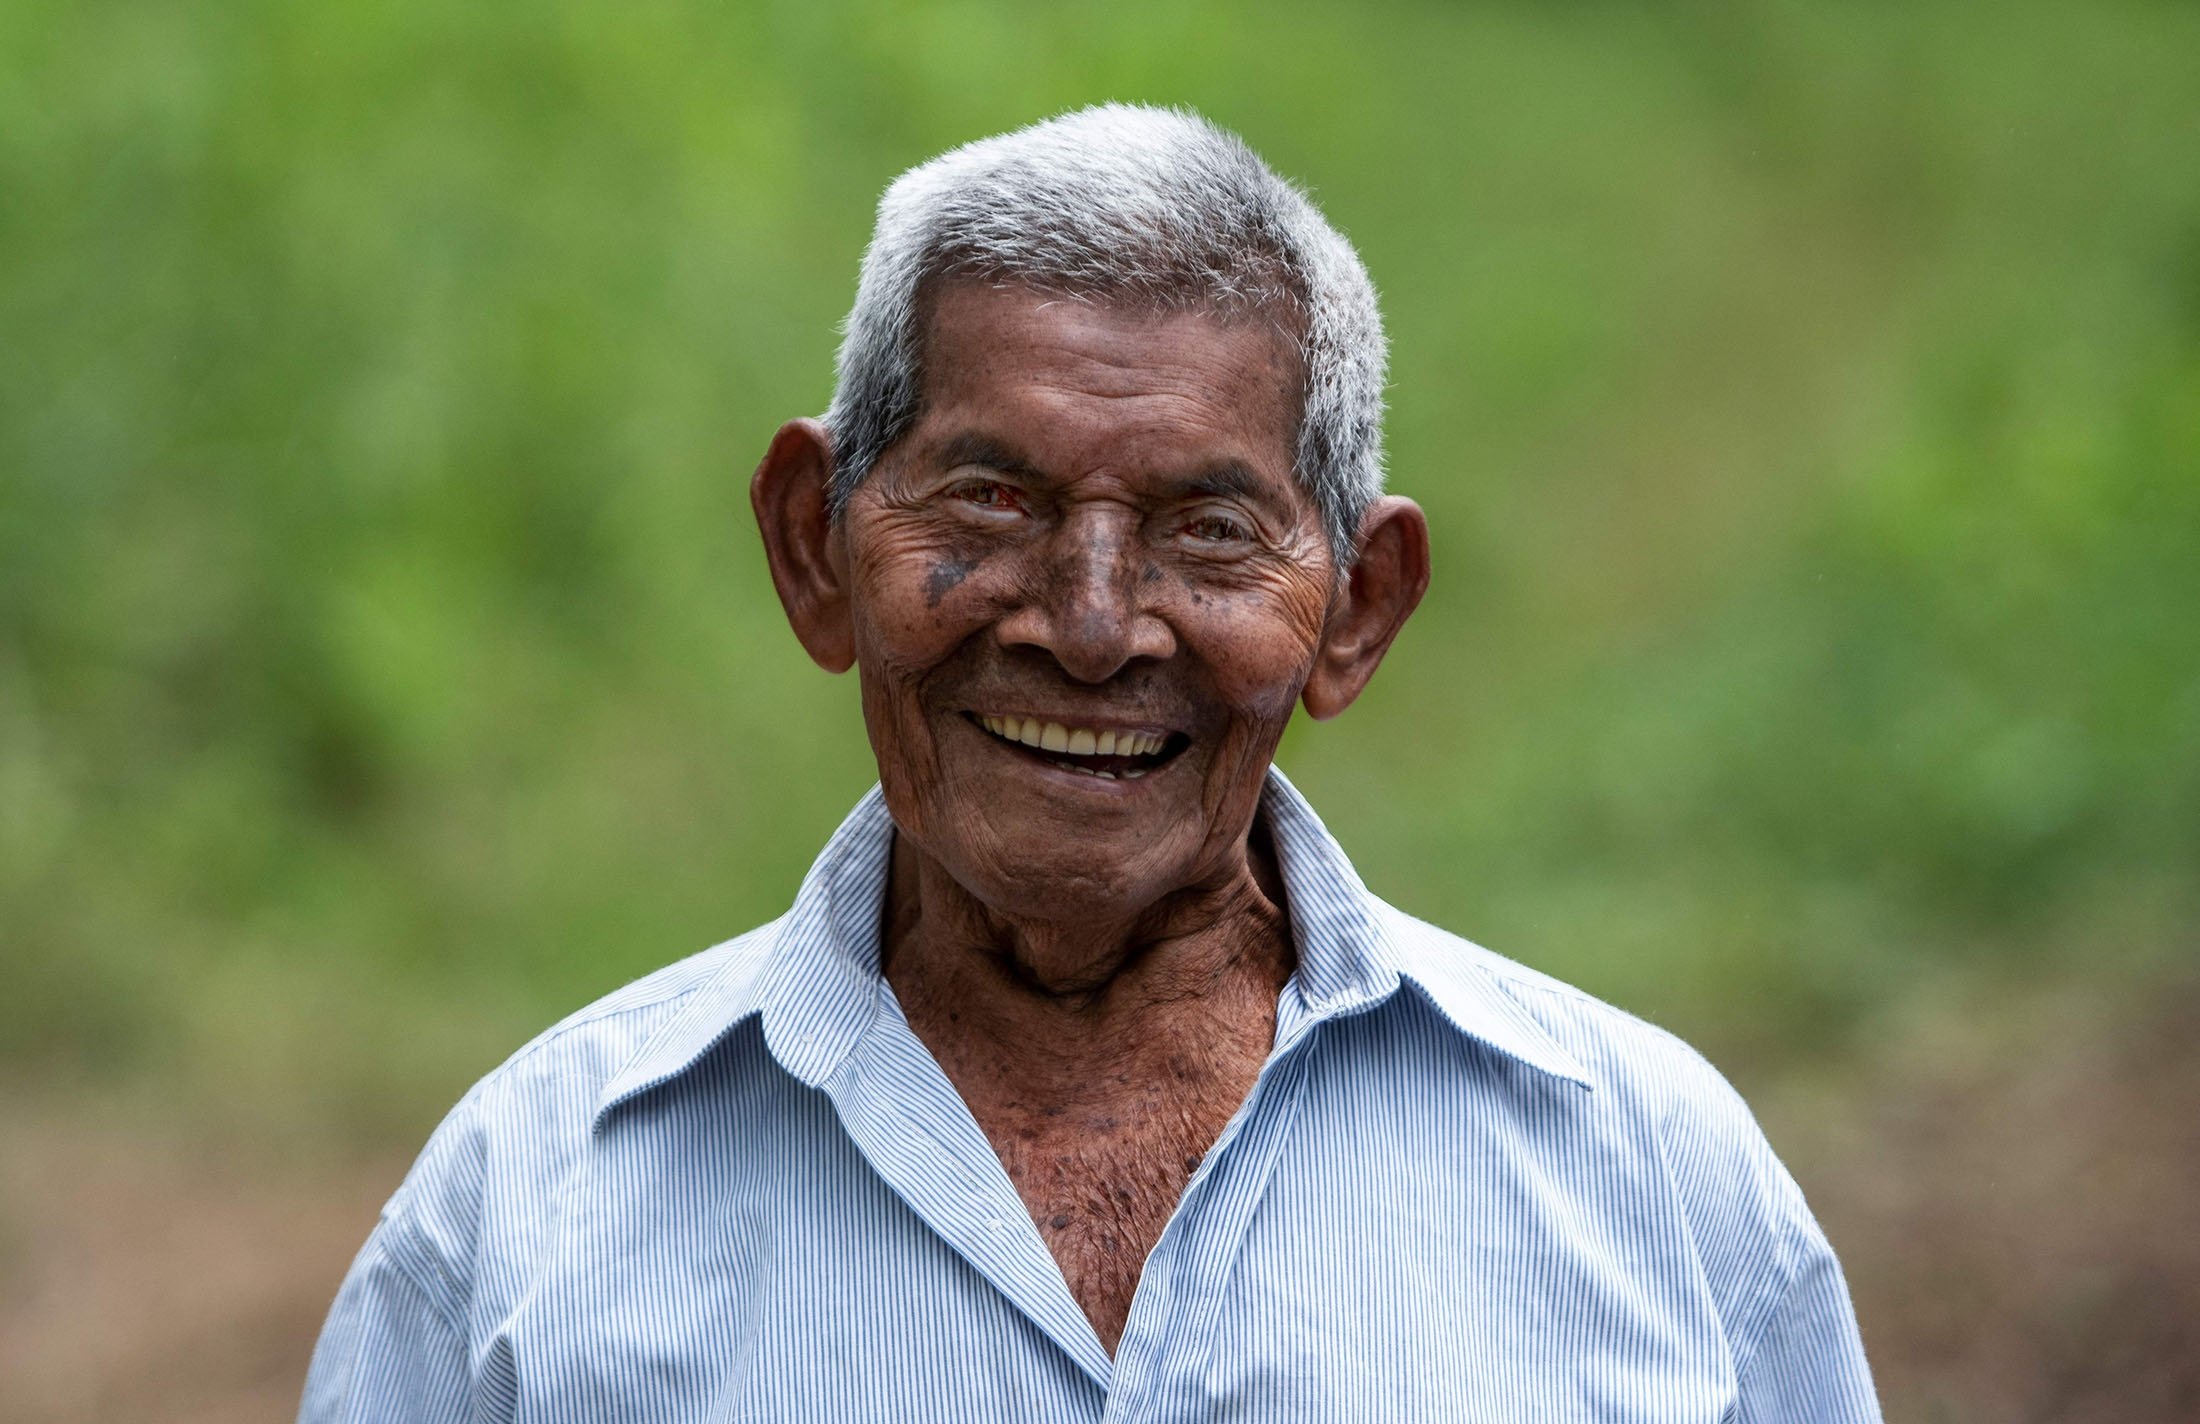 Saturnino Lopez Hernandez, 94, smiles at his home in Nicoya, Costa Rica, Aug. 27, 2021. (AFP Photo)